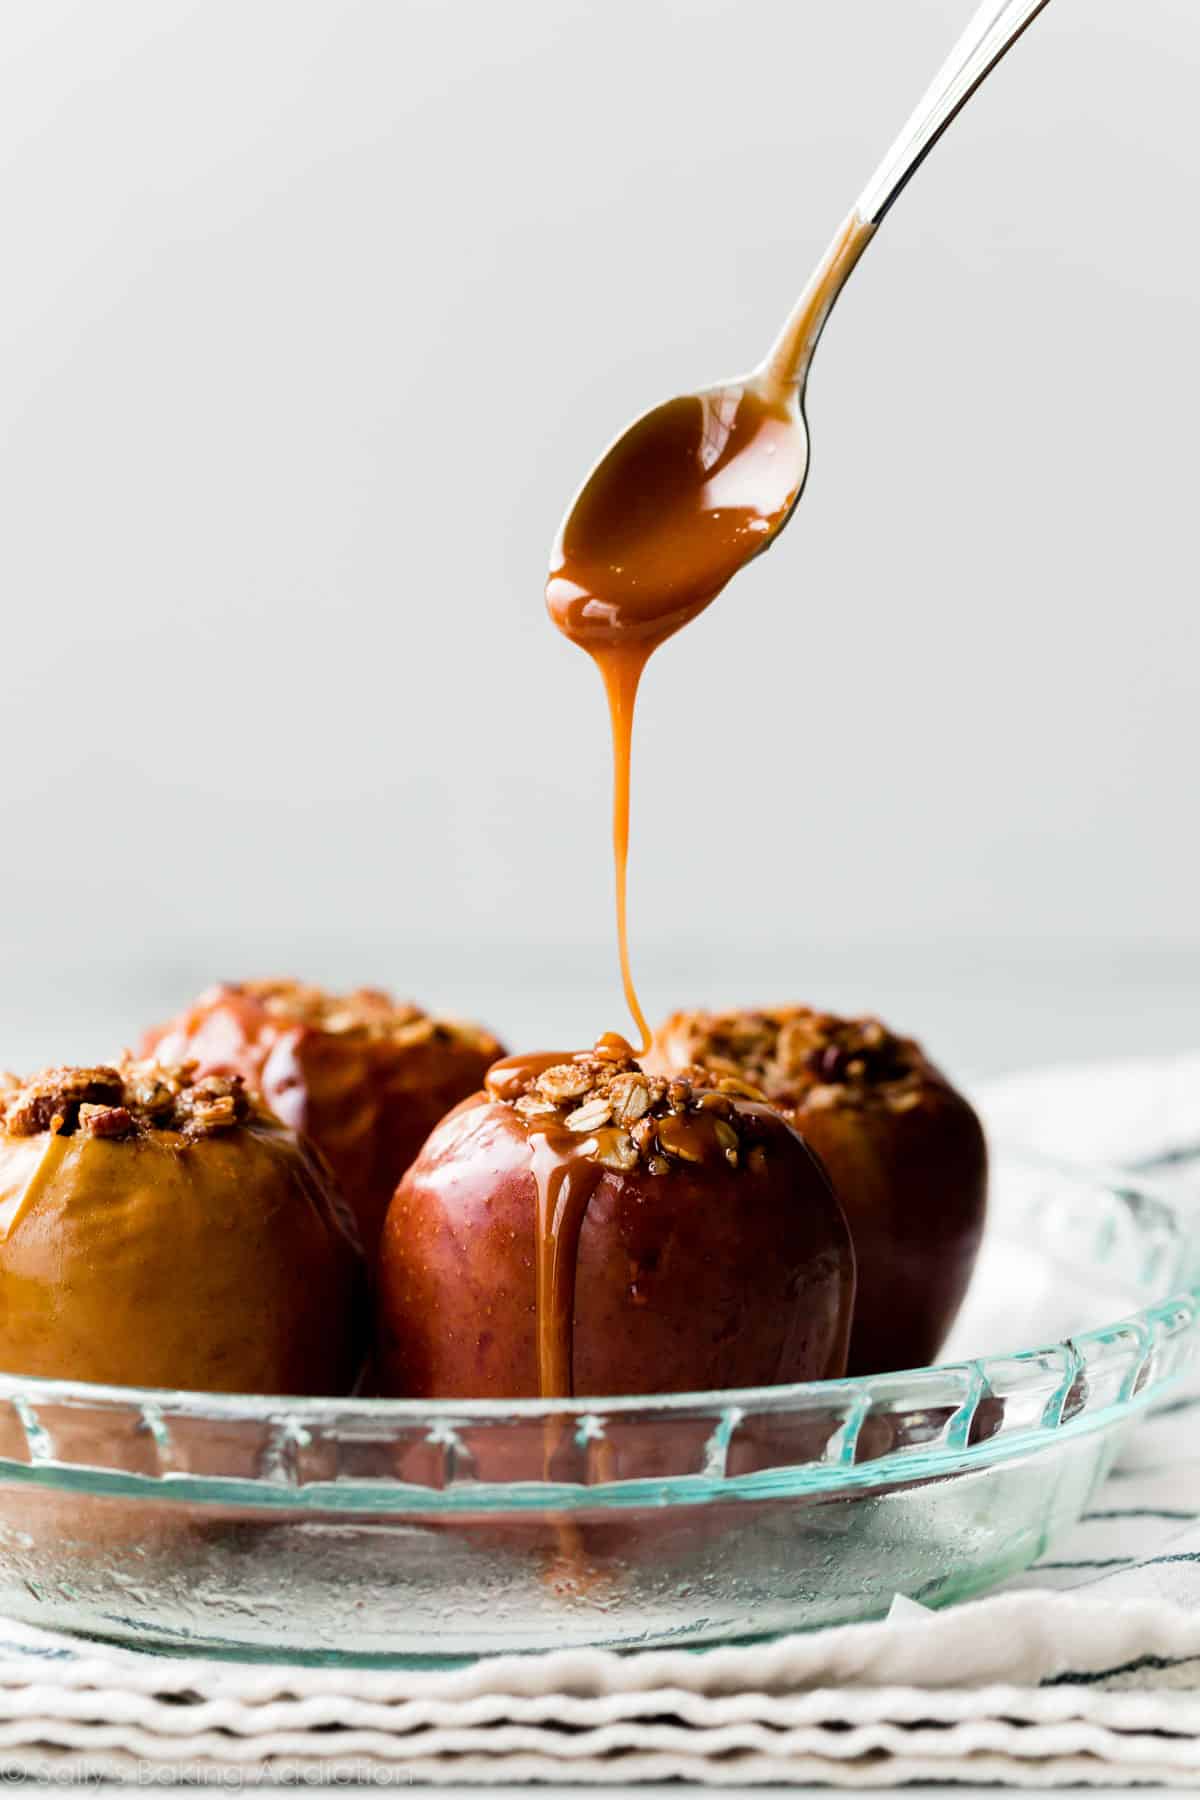 spoon drizzling caramel on baked apples